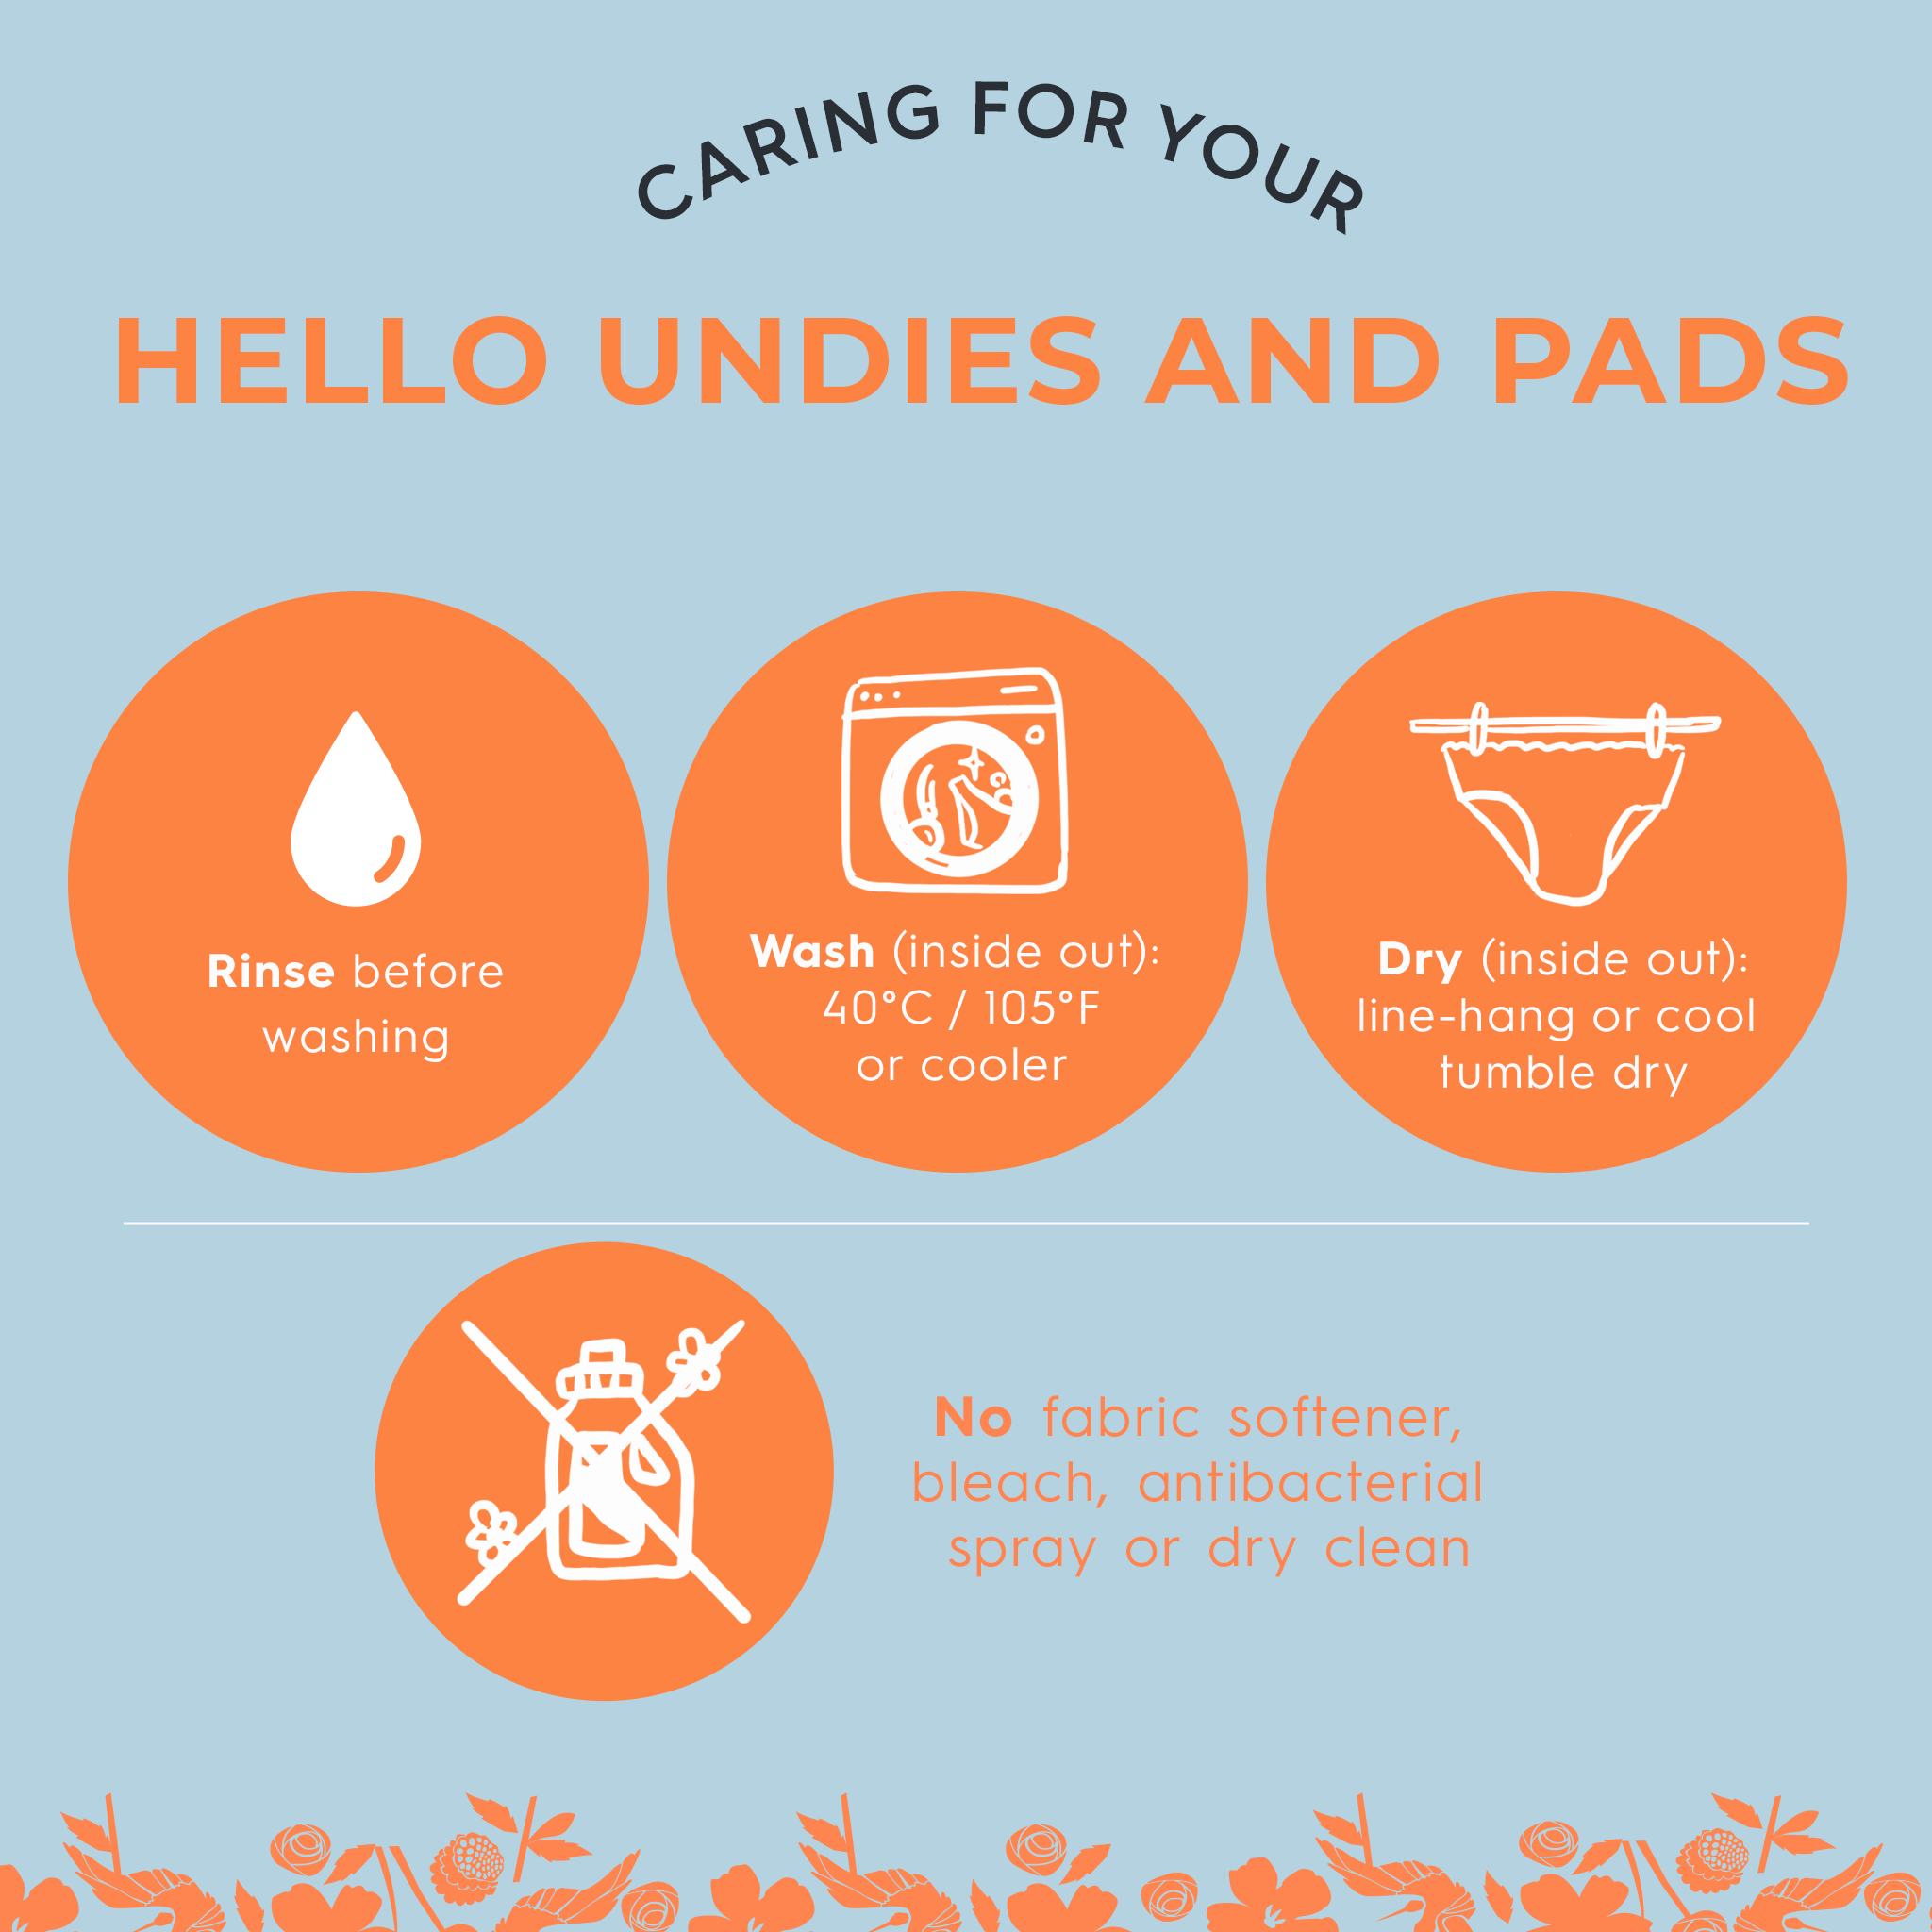 HOW TO WASH AND CARE FOR YOUR HELLO UNDIES AND PADS